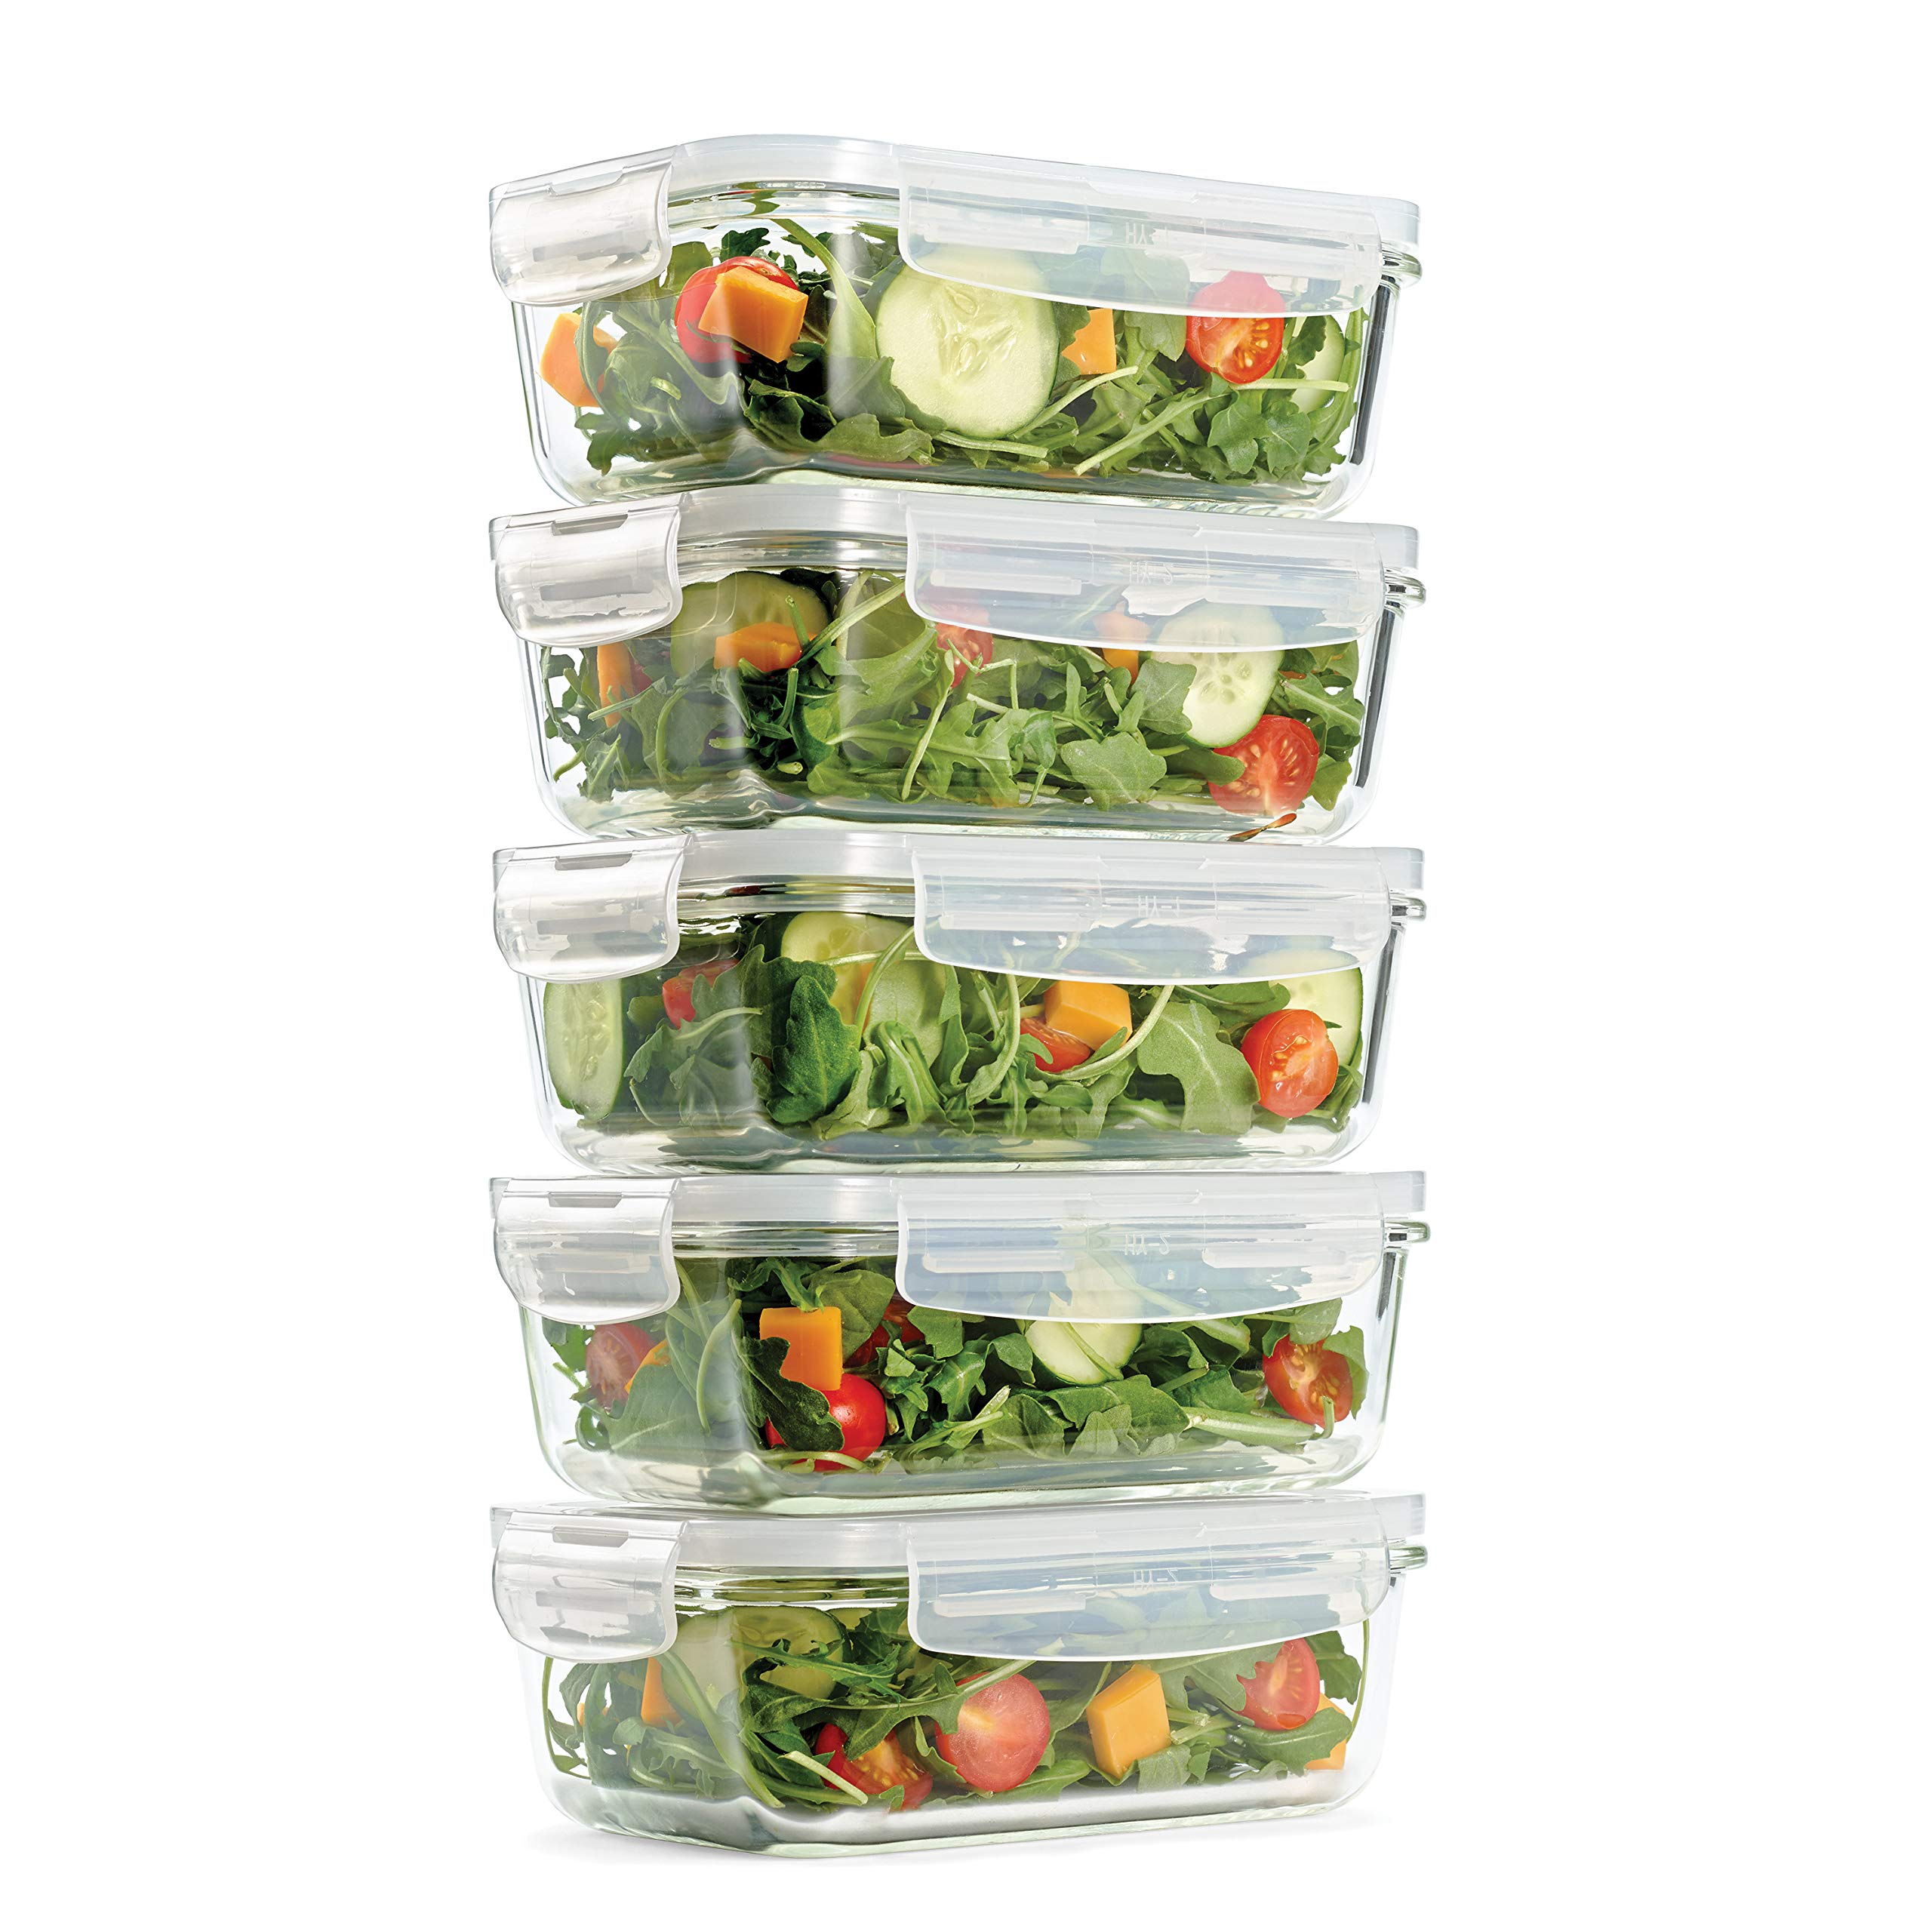 Fit & Fresh Glass Containers, Set of 5 Containers with Locking Lids, Meal Prep, 5 Pack, Glass Storage Containers with Airtight Seal, 28 oz.